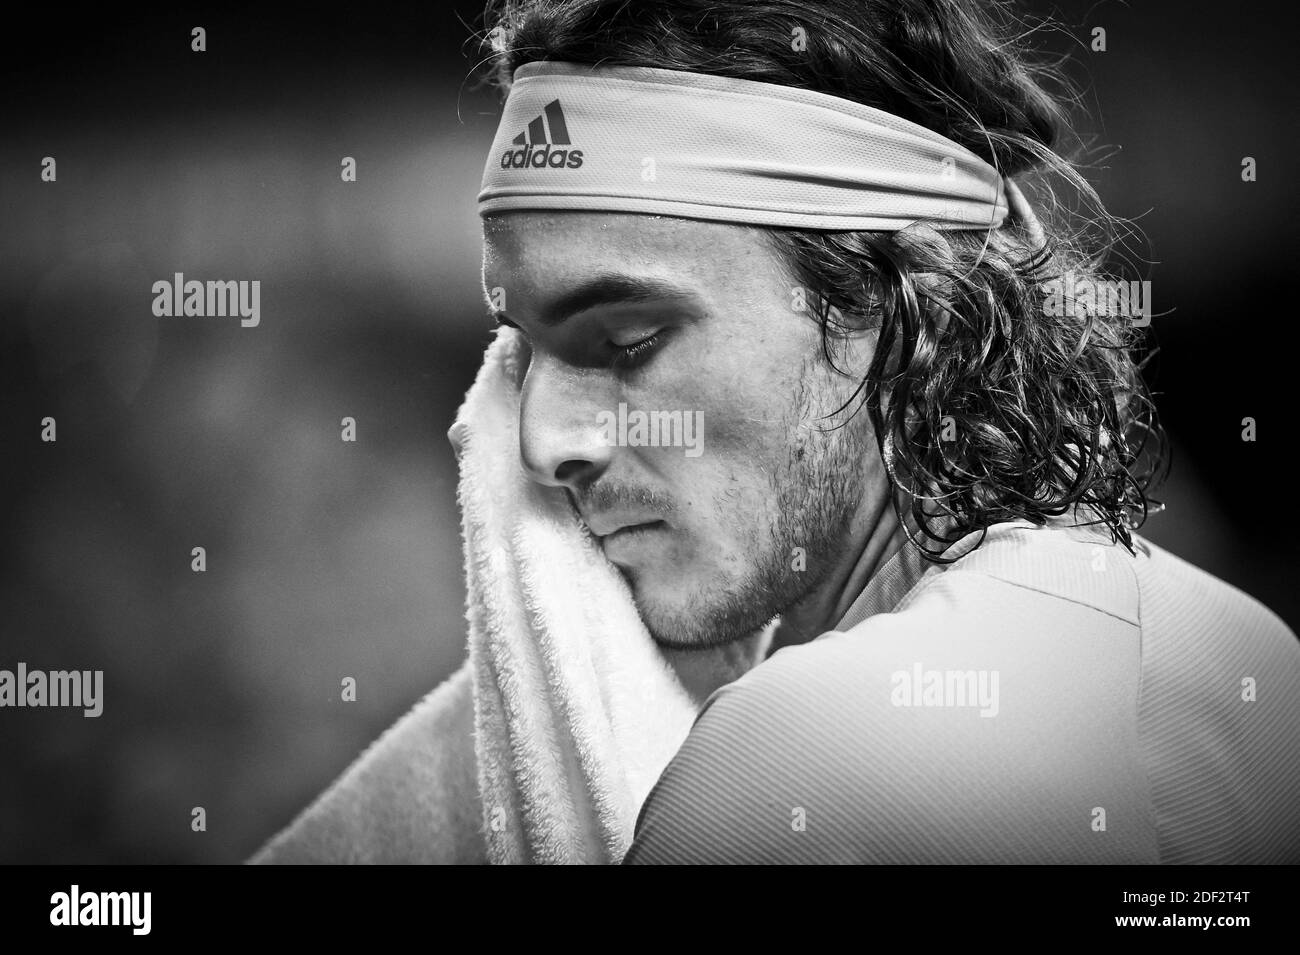 Stefanos Tsitsipas Gre Wins His Second Tittle At The Open 13 Provence At The Palais Des Sports In Marseille France On February 23 2020 Photo By Corinne Dubreuil Abacapress Com Stock Photo Alamy